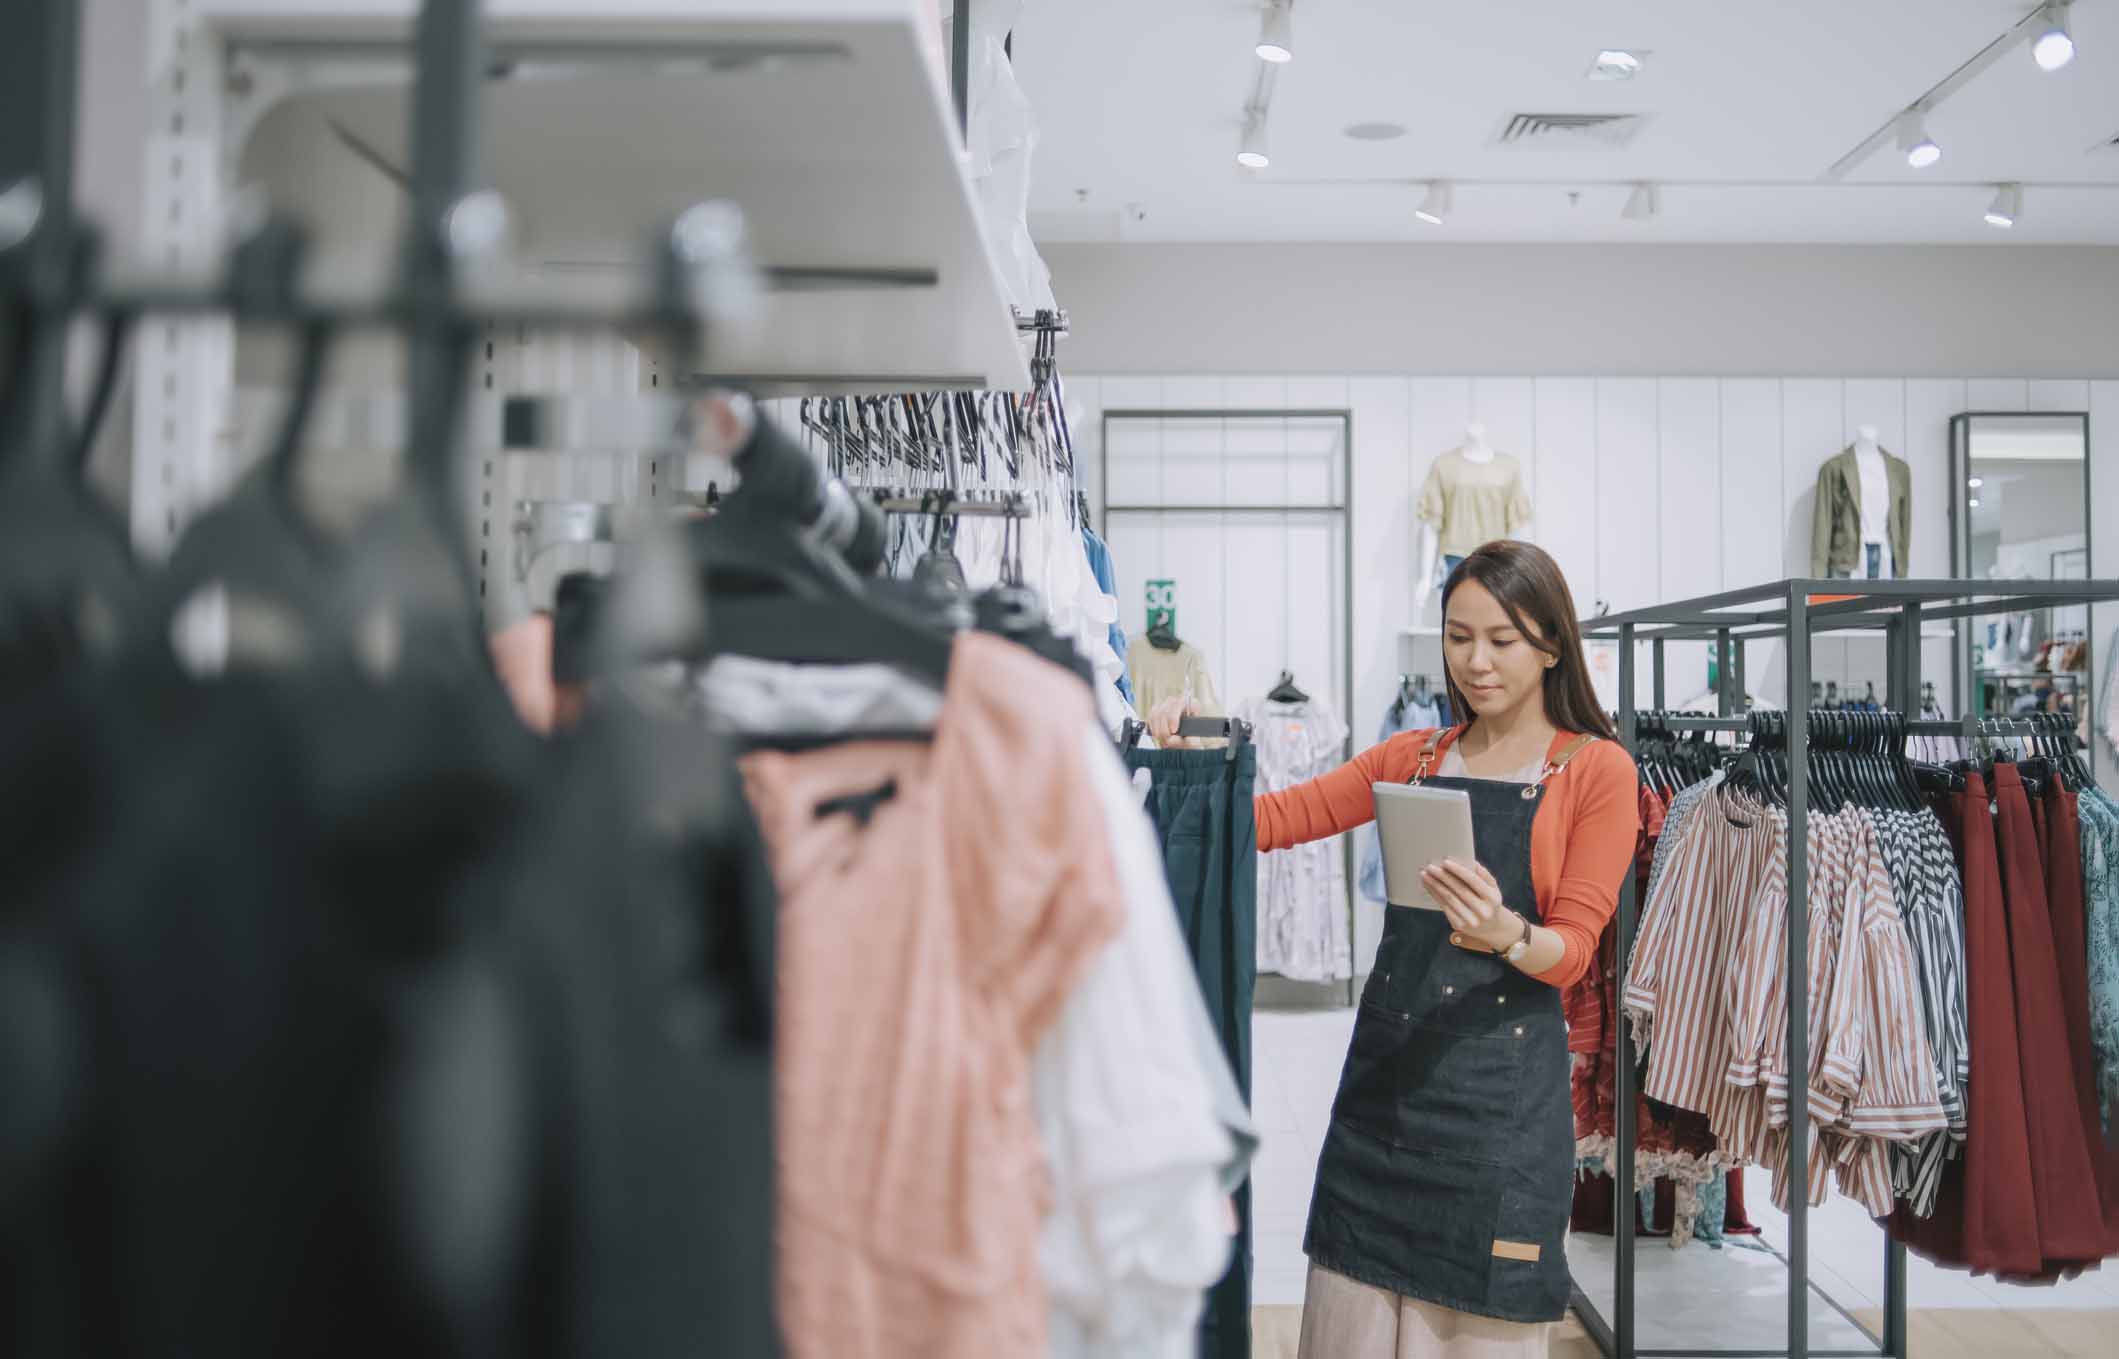 Retailers Need to Balance Digital CX and In-Store Experiences in 2022